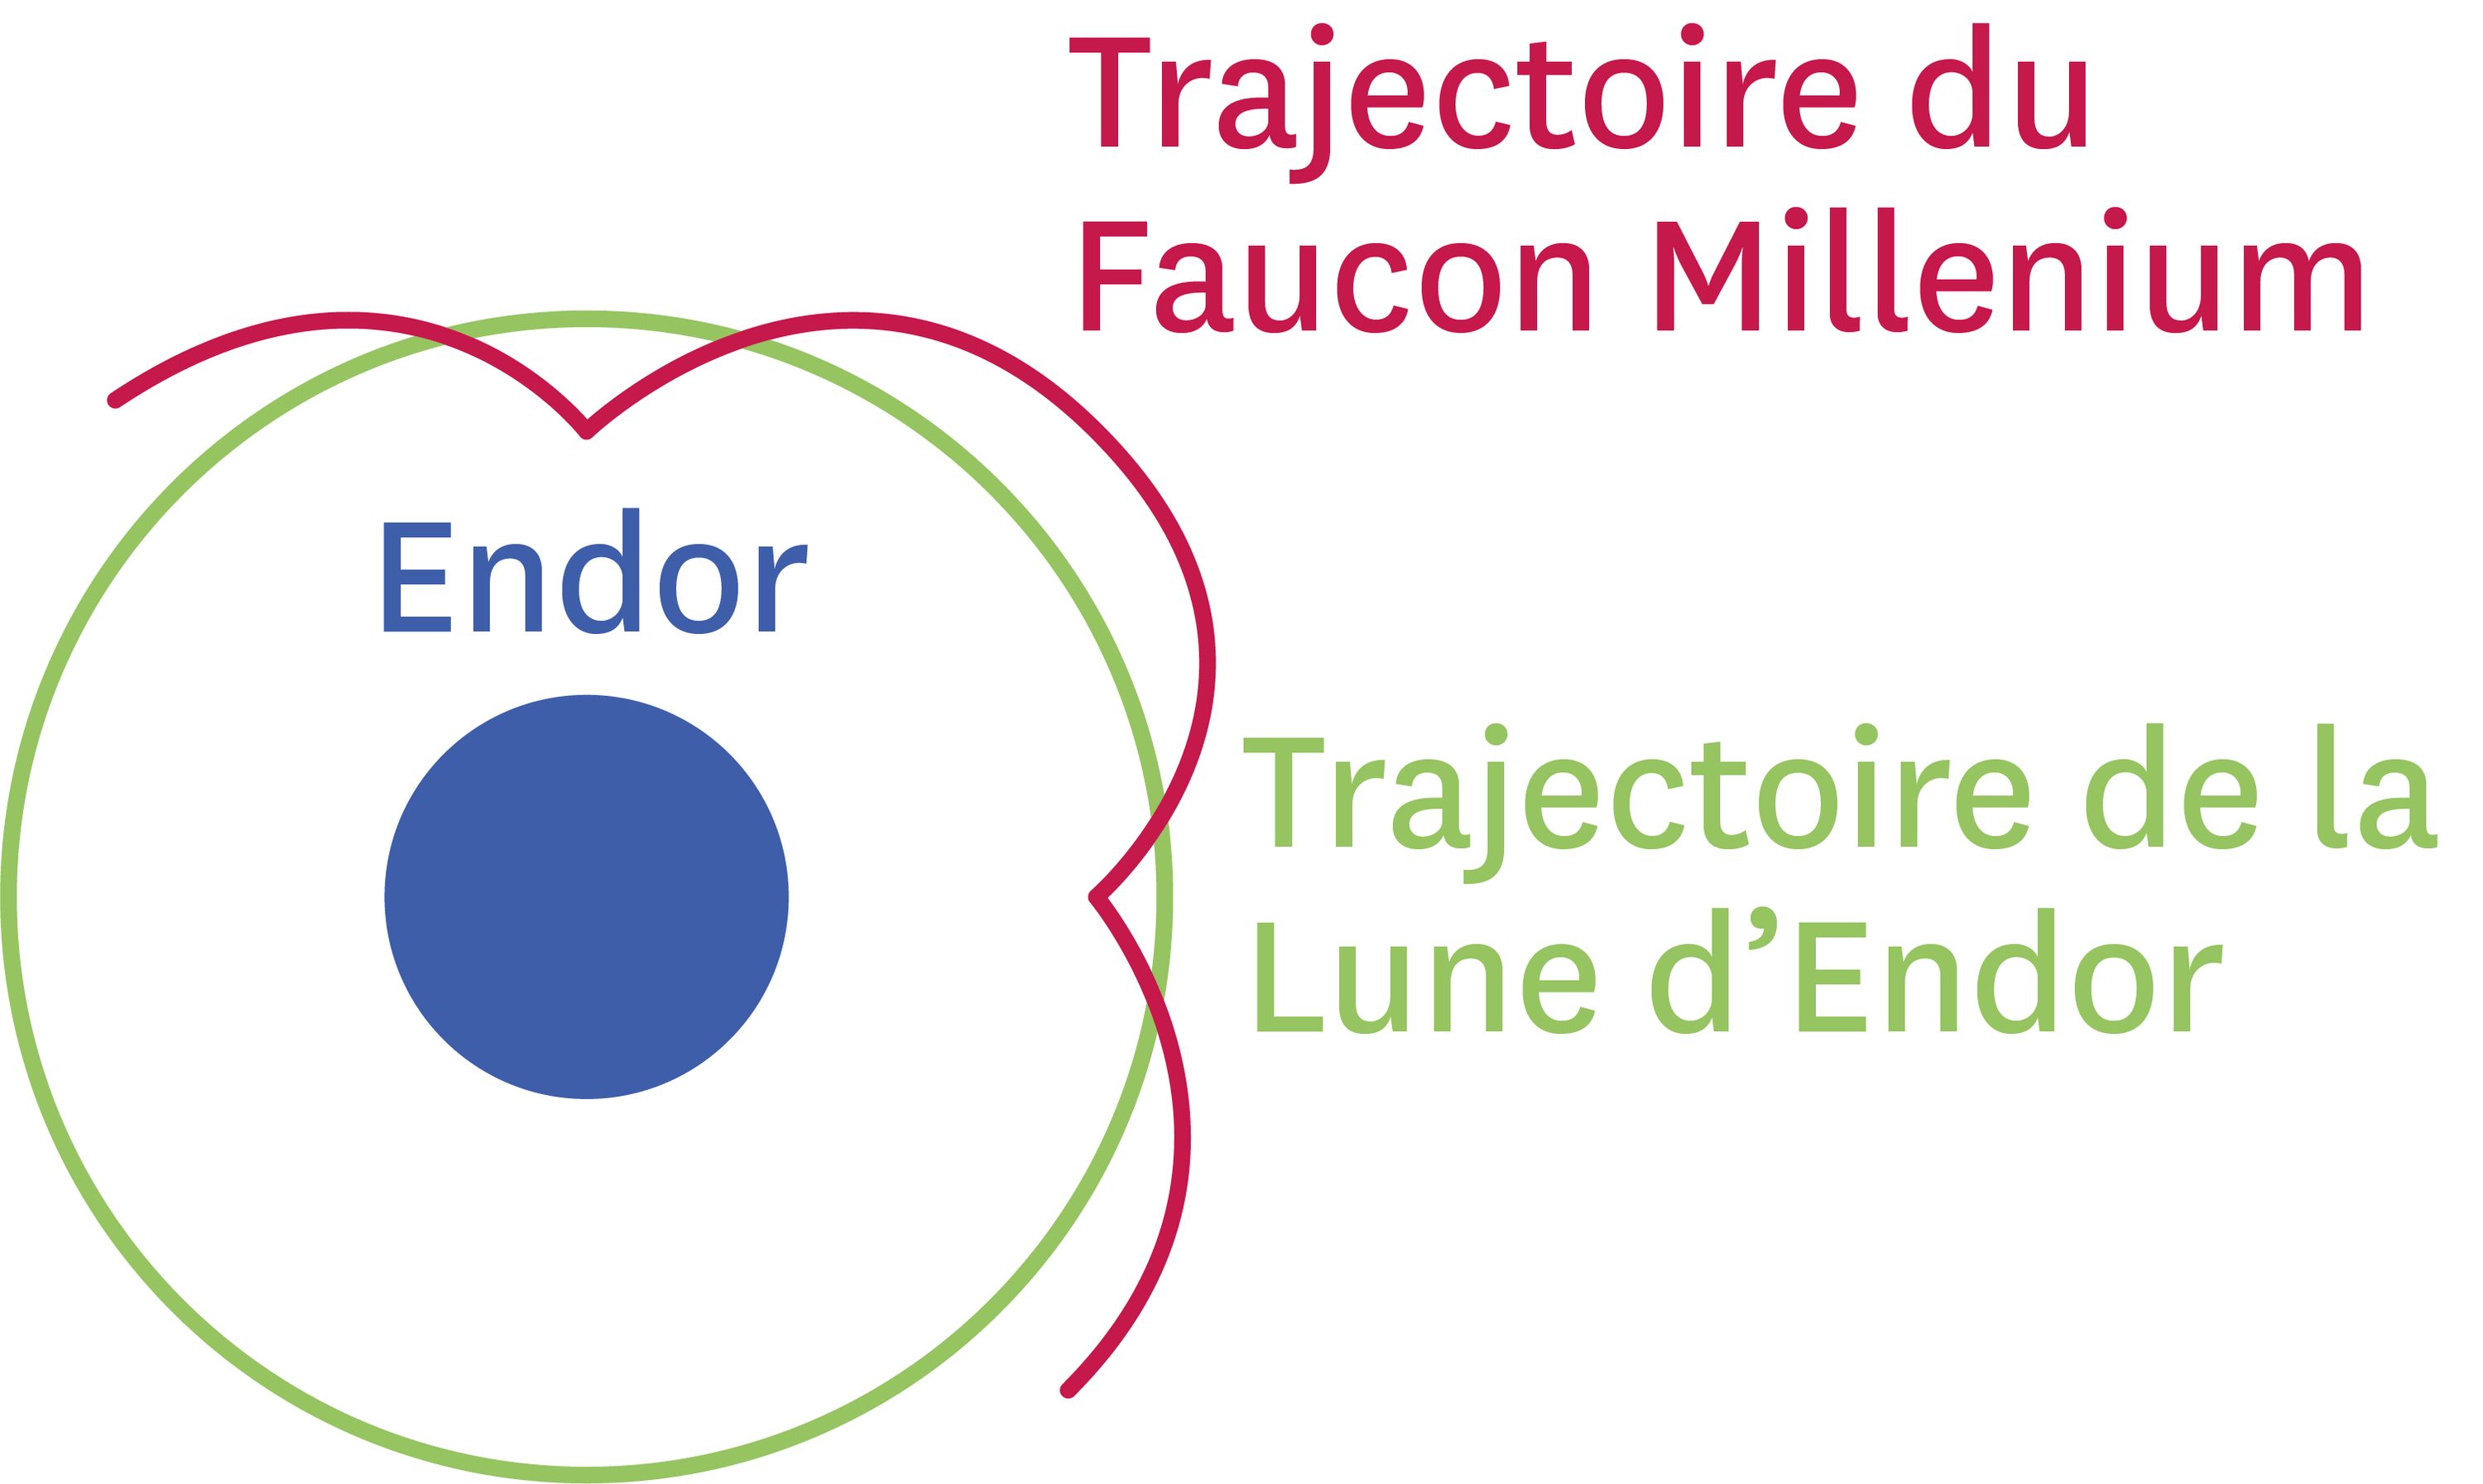 <stamp theme='pc-green1'>Doc. 2</stamp> En rouge : la trajectoire du Faucon autour d’Endor.